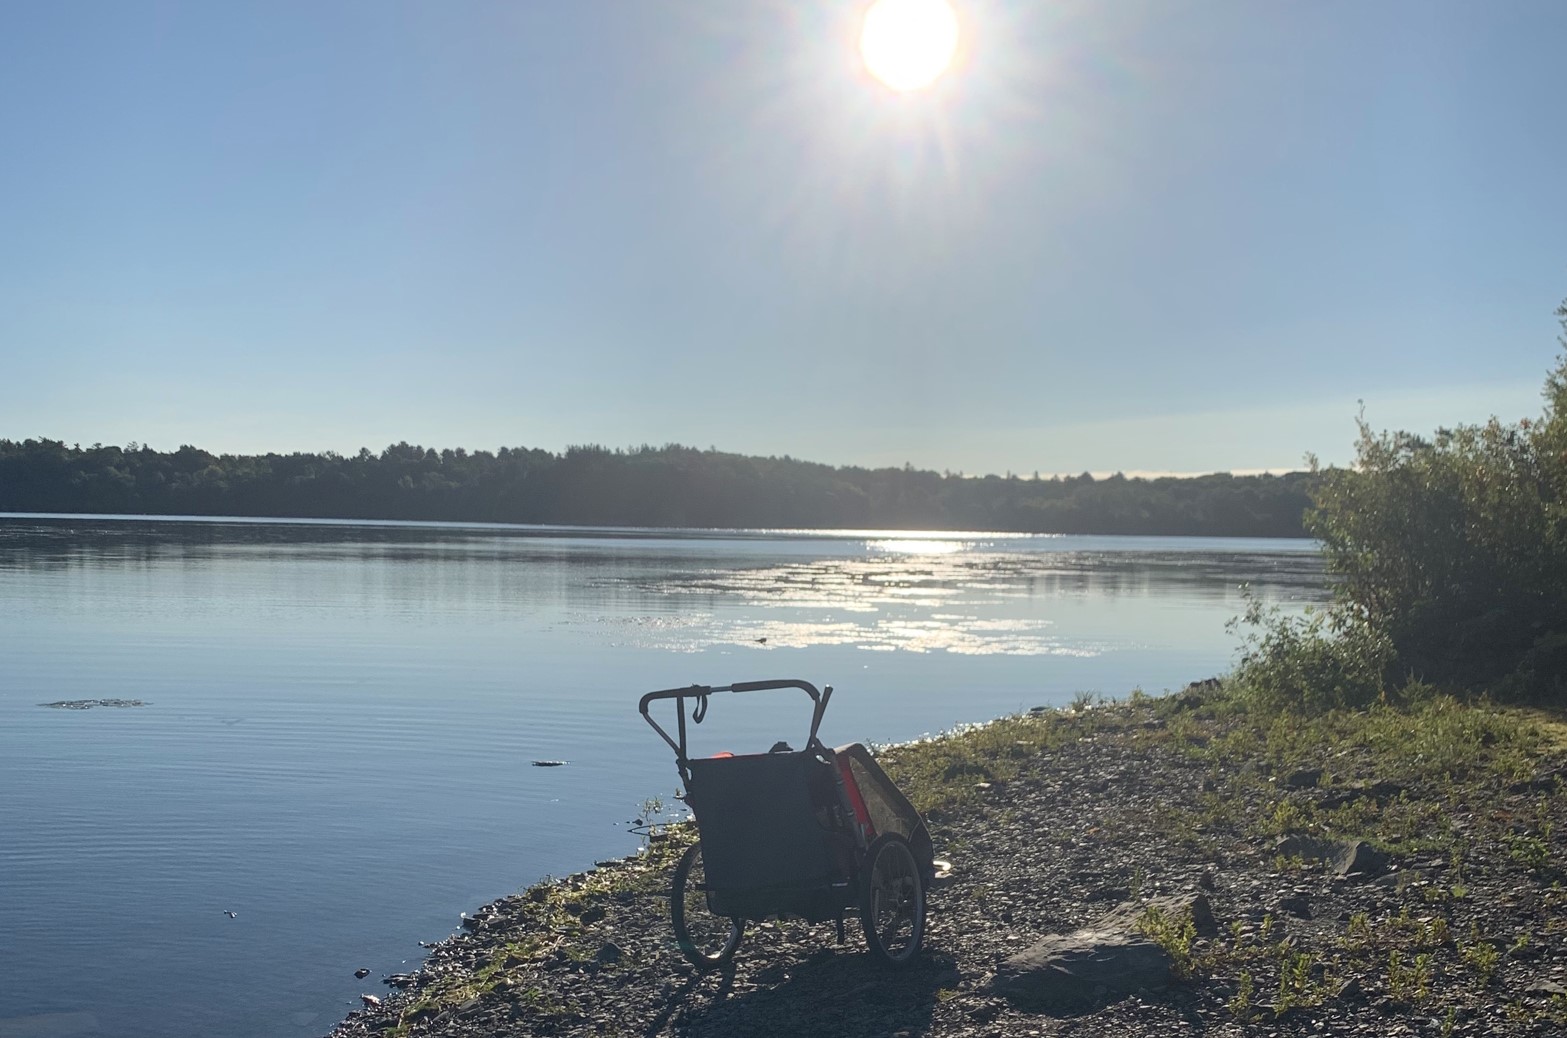 Jogging stroller, besides a body of water